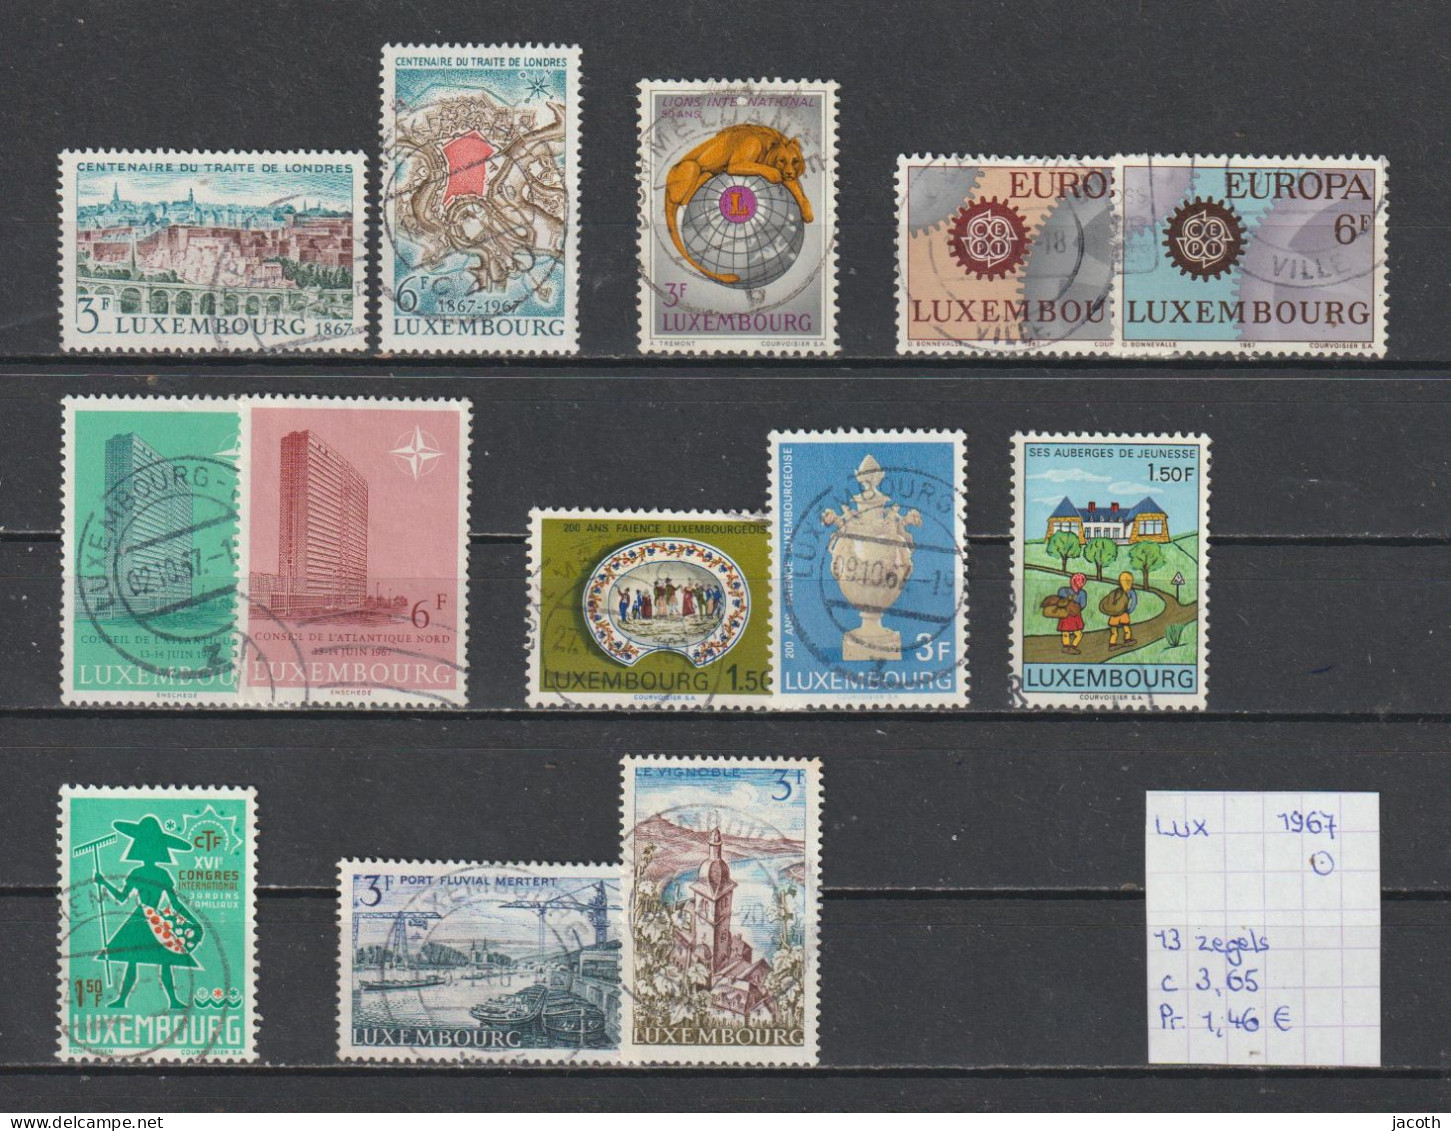 (TJ) Luxembourg 1967 - 13 Zegels (gest./obl./used) - Used Stamps